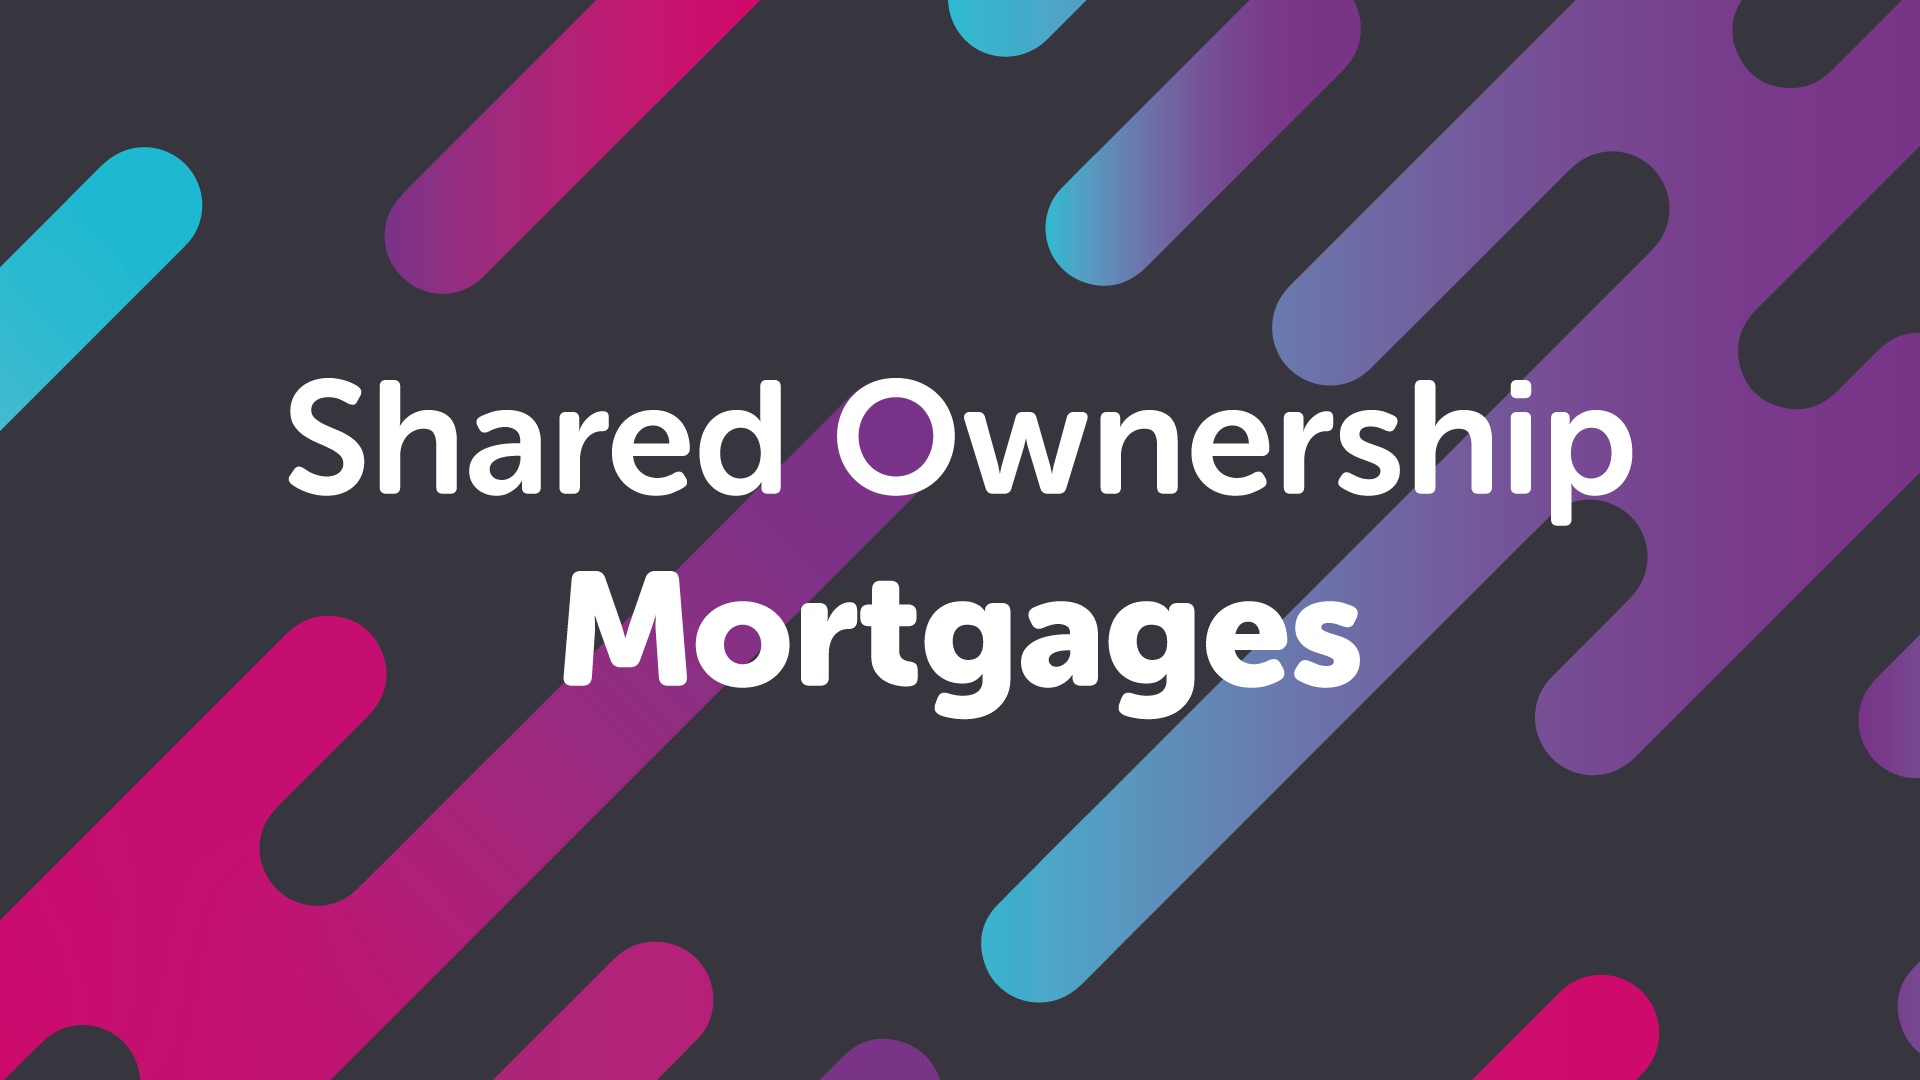 Shared Ownership - What is it? How does it work?